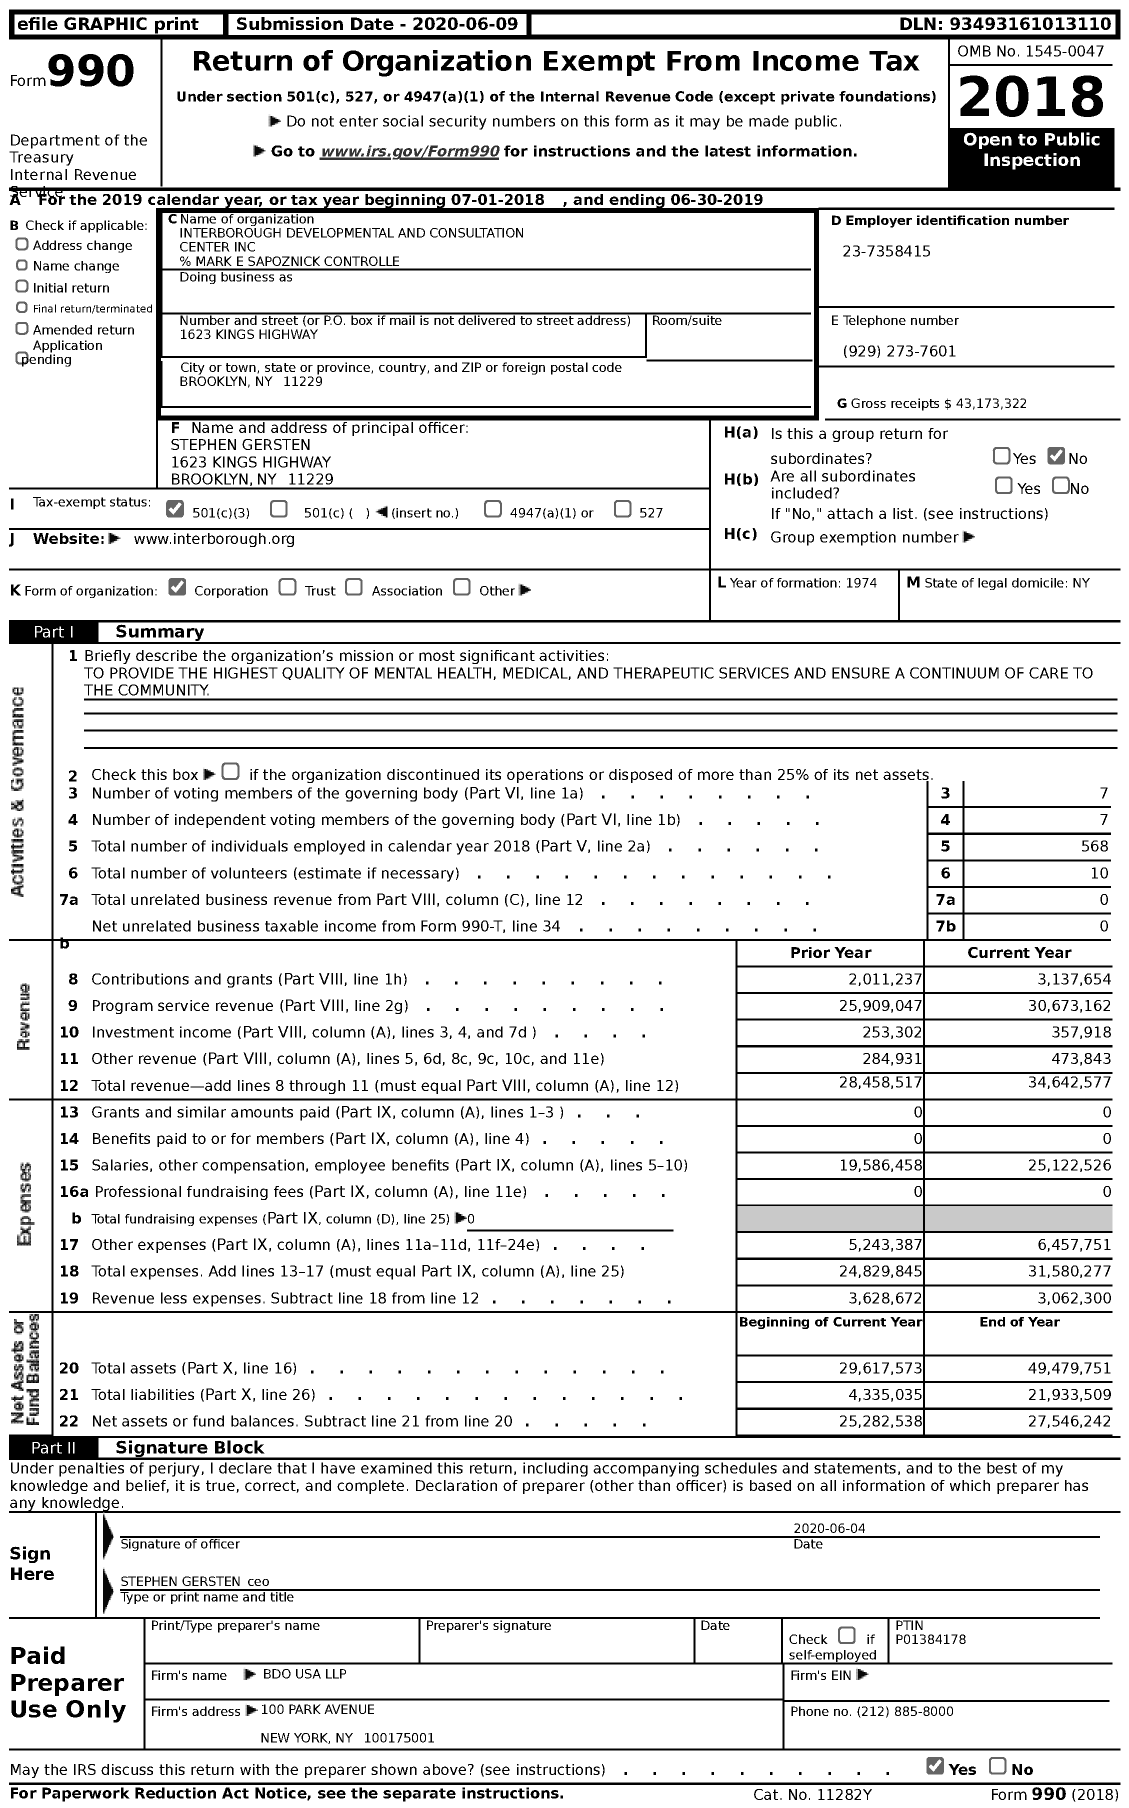 Image of first page of 2018 Form 990 for Interborough Developmental and Consultation Center (IDCC)